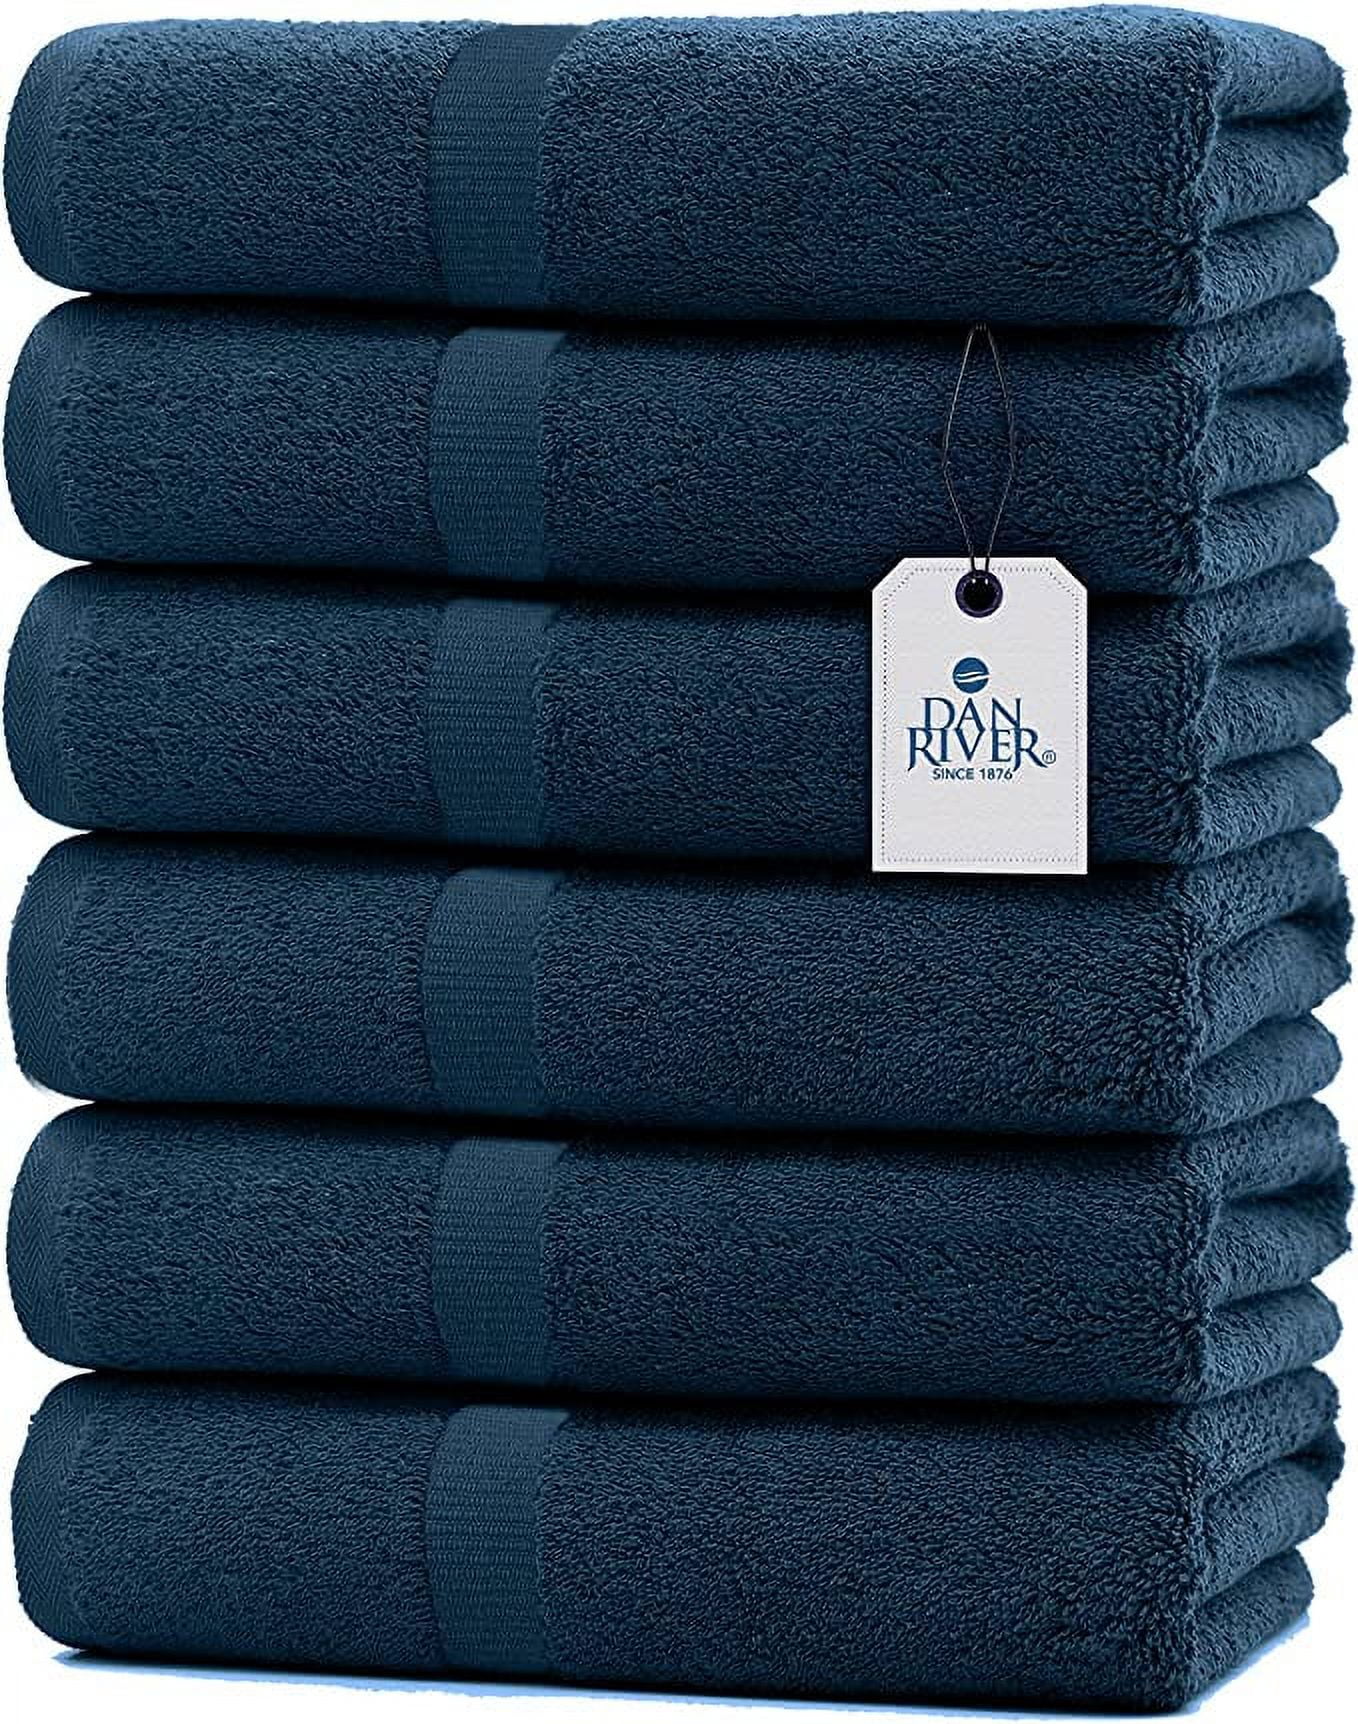 Utopia Towels 6 Pack Bath Towel Set, 100% Ring Spun Cotton (24 X 48 Inches)  Medium Lightweight And Highly Absorbent Quick Drying